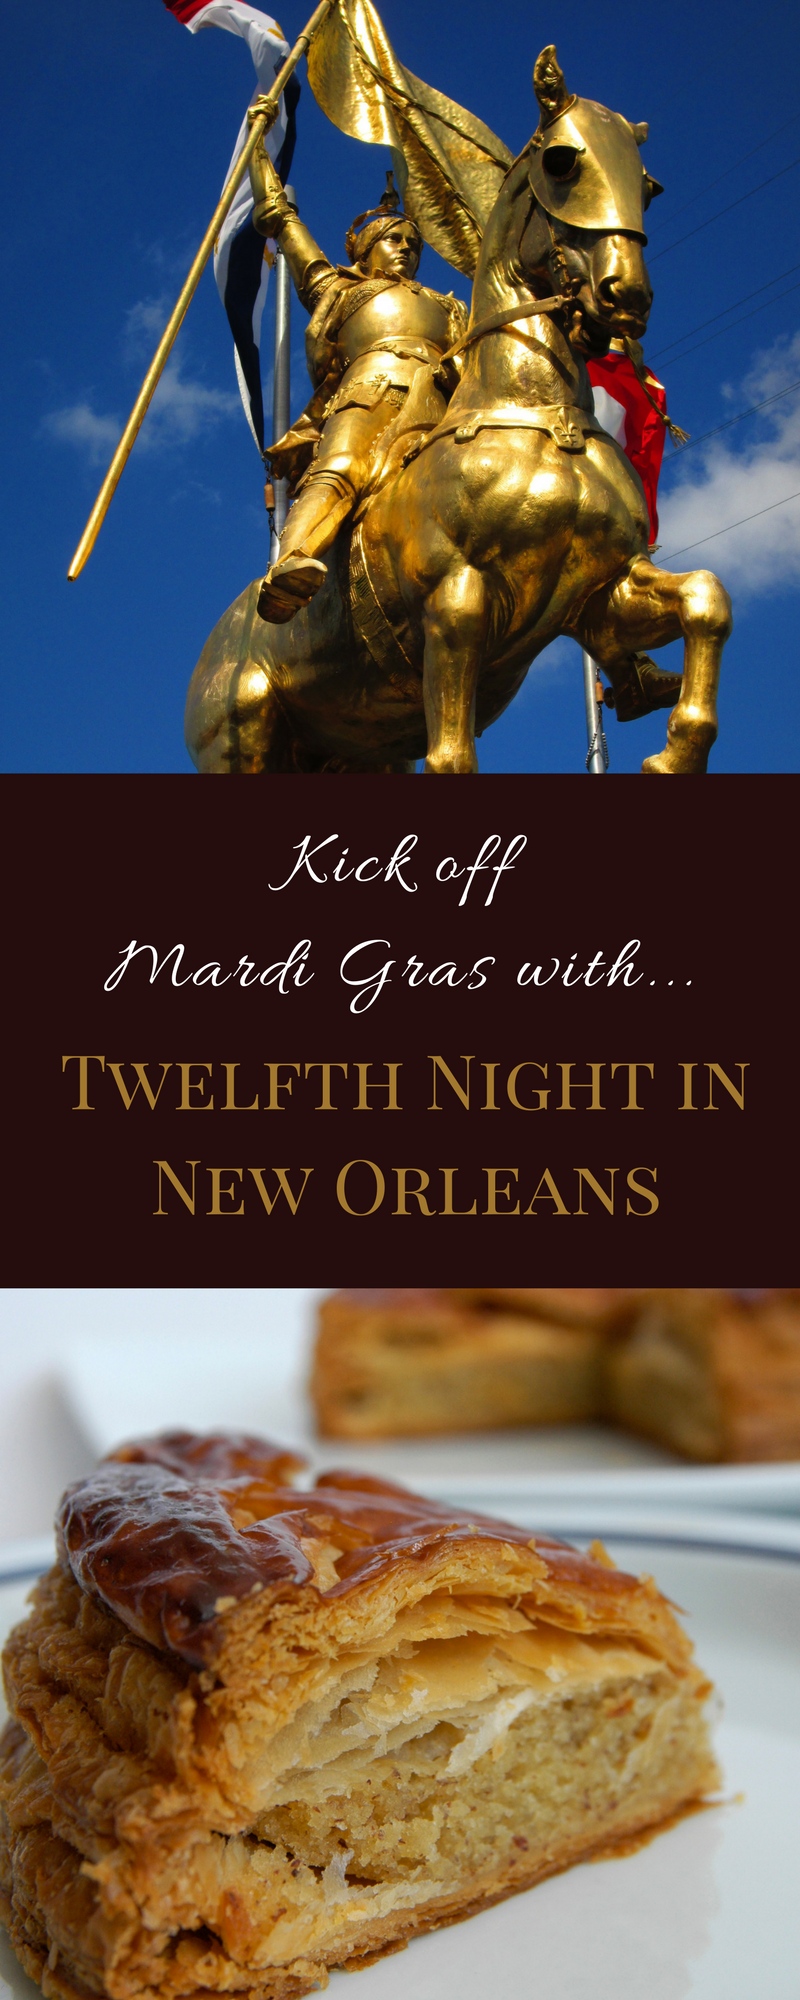 If you want to experience a taste of Carnival but without the crowds, Twelfth Night might be just the New Orleans experience you're looking for. Here's what to expect. (Photo credits: Stephen Rees and Yuichi Sakuraba)